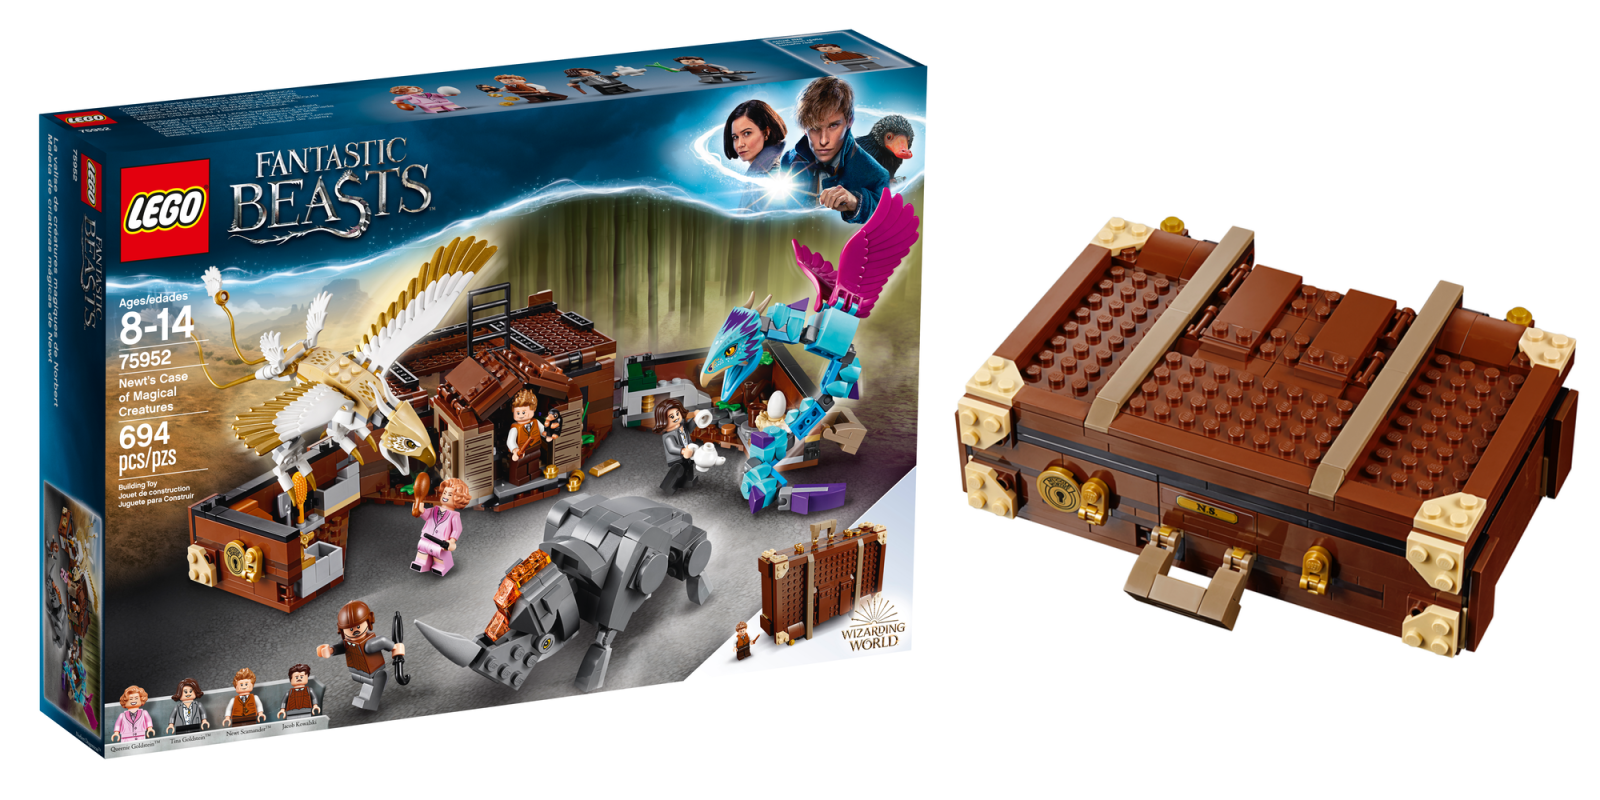 LEGO unveils two new Harry Potter kits from 'Philosopher's Stone' and